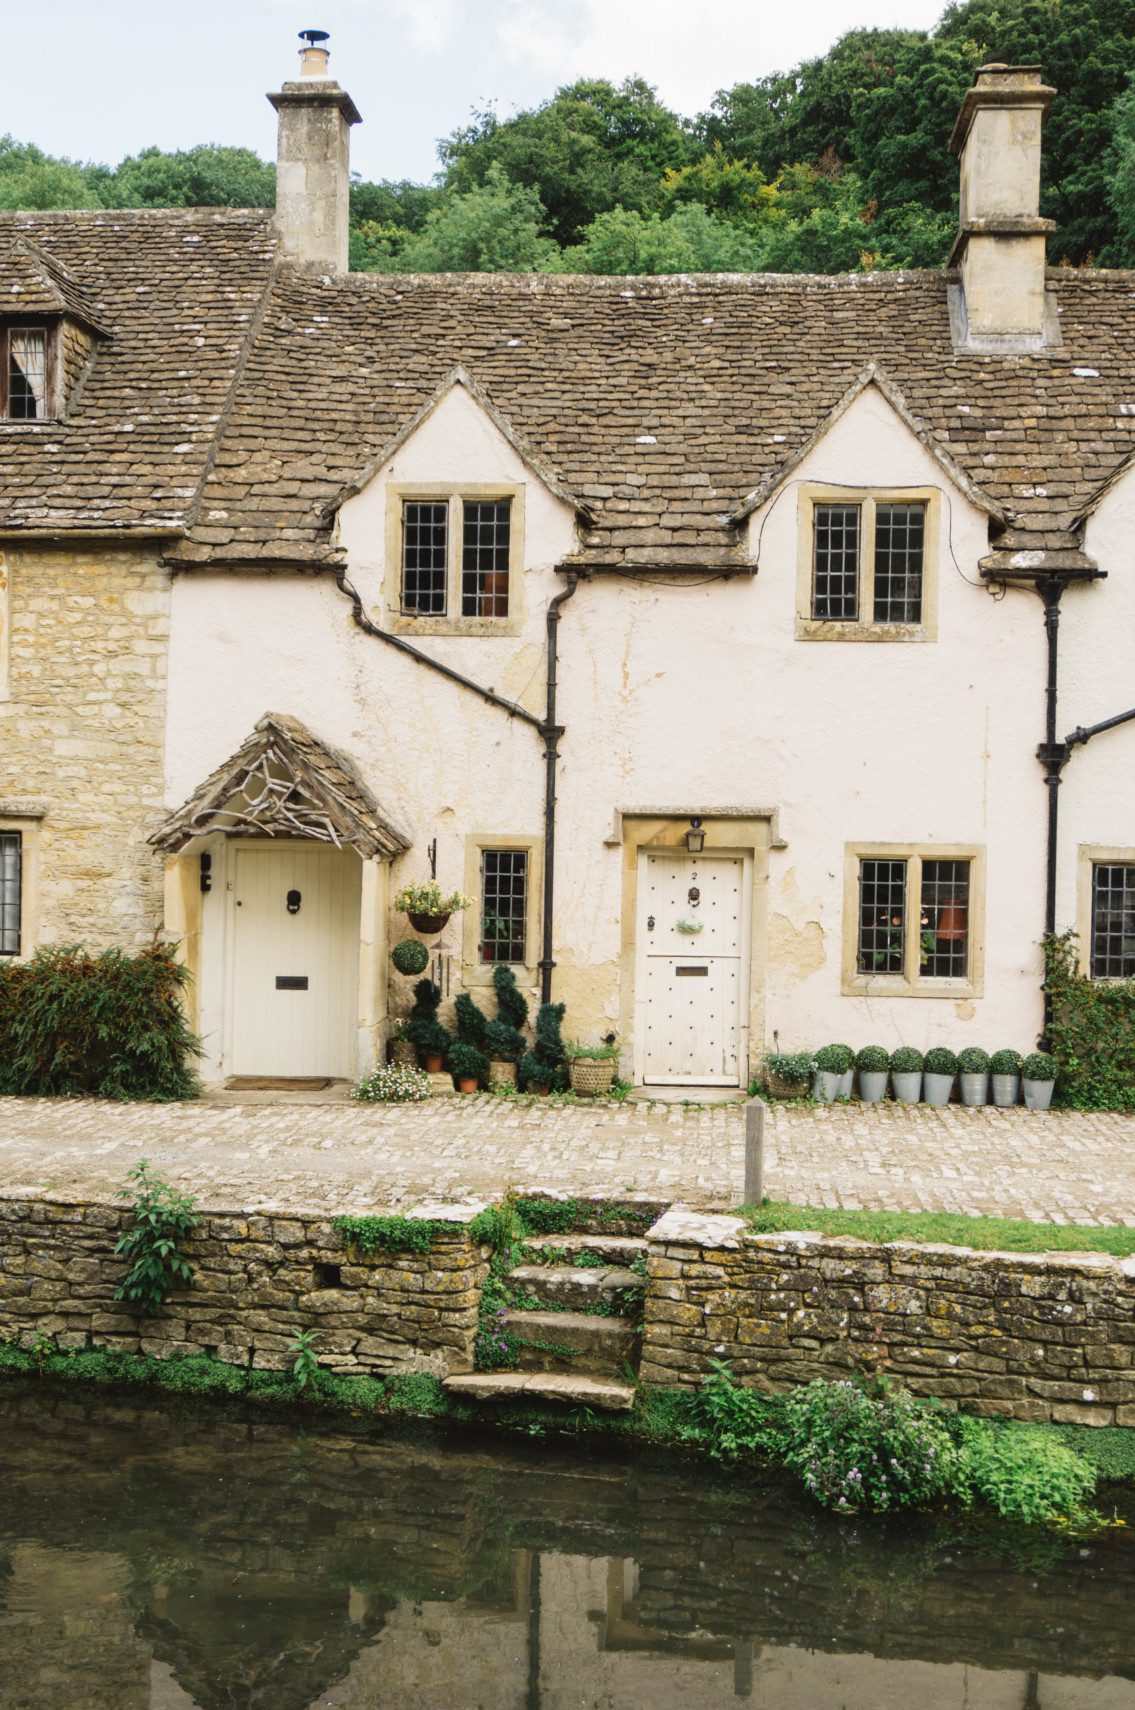 Castle Combe: The Most Beautiful Village in England